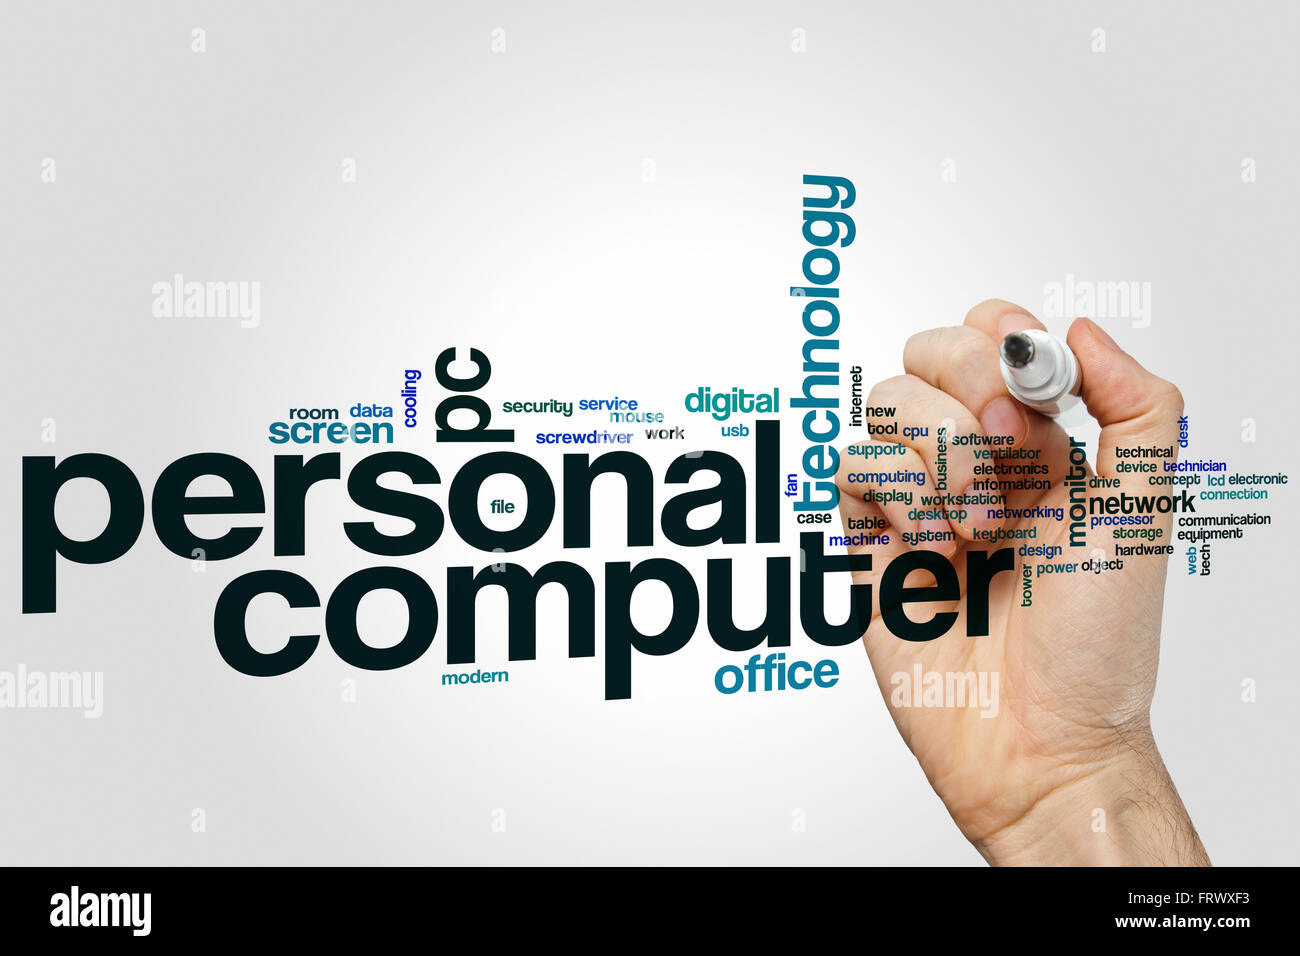 Personal computer concept word cloud background Stock Photo